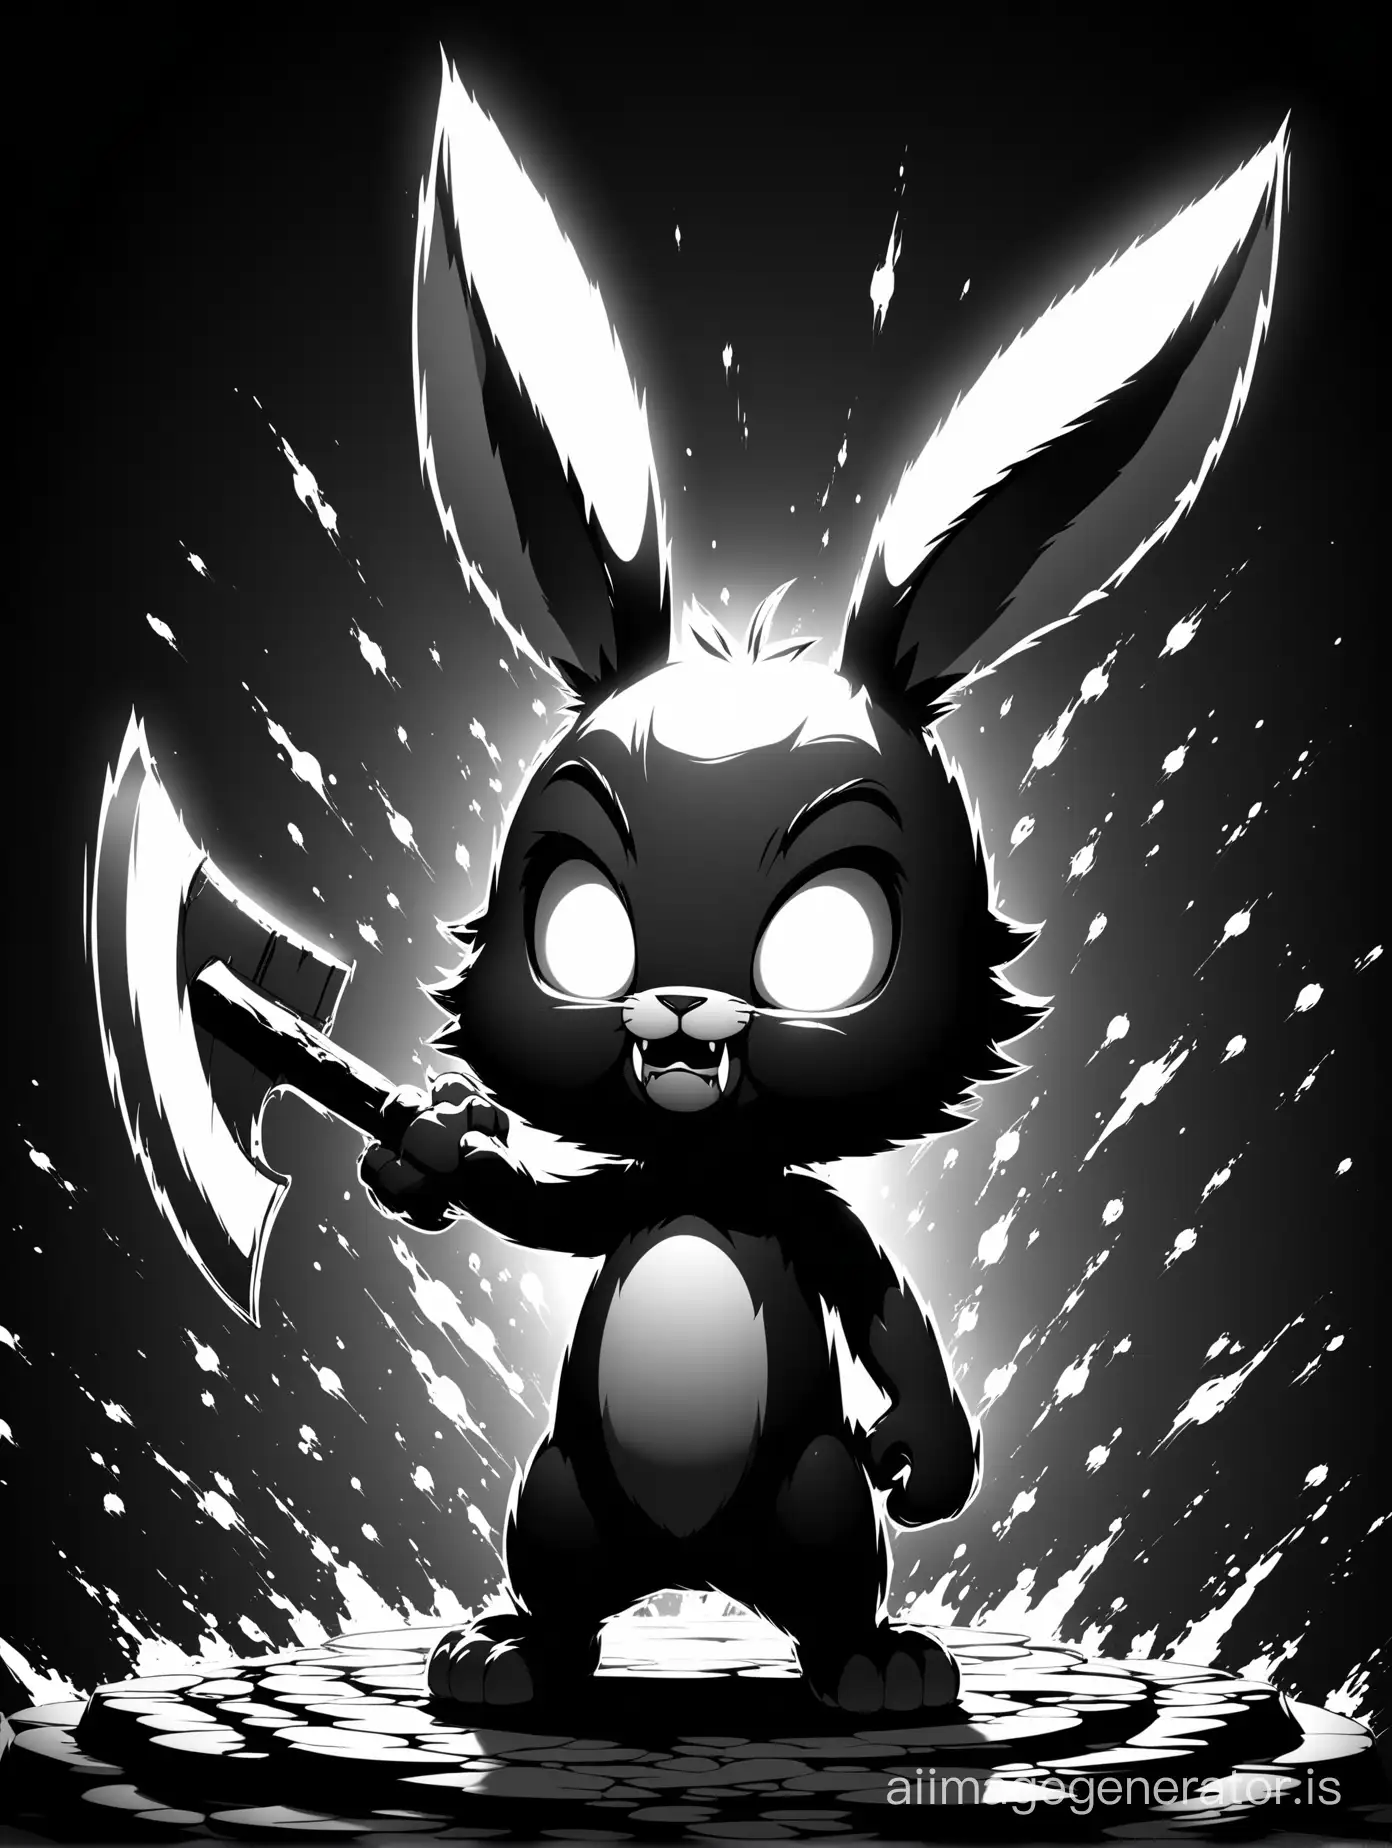 Crazy demonic rabbit, with big ears, monochrome, ax in paw, little tail, blood, 3D, drawing, HD, proportionality, vector, fantasy, anime. Against the background, bright flashes of abstraction, dark colors, bright glow.